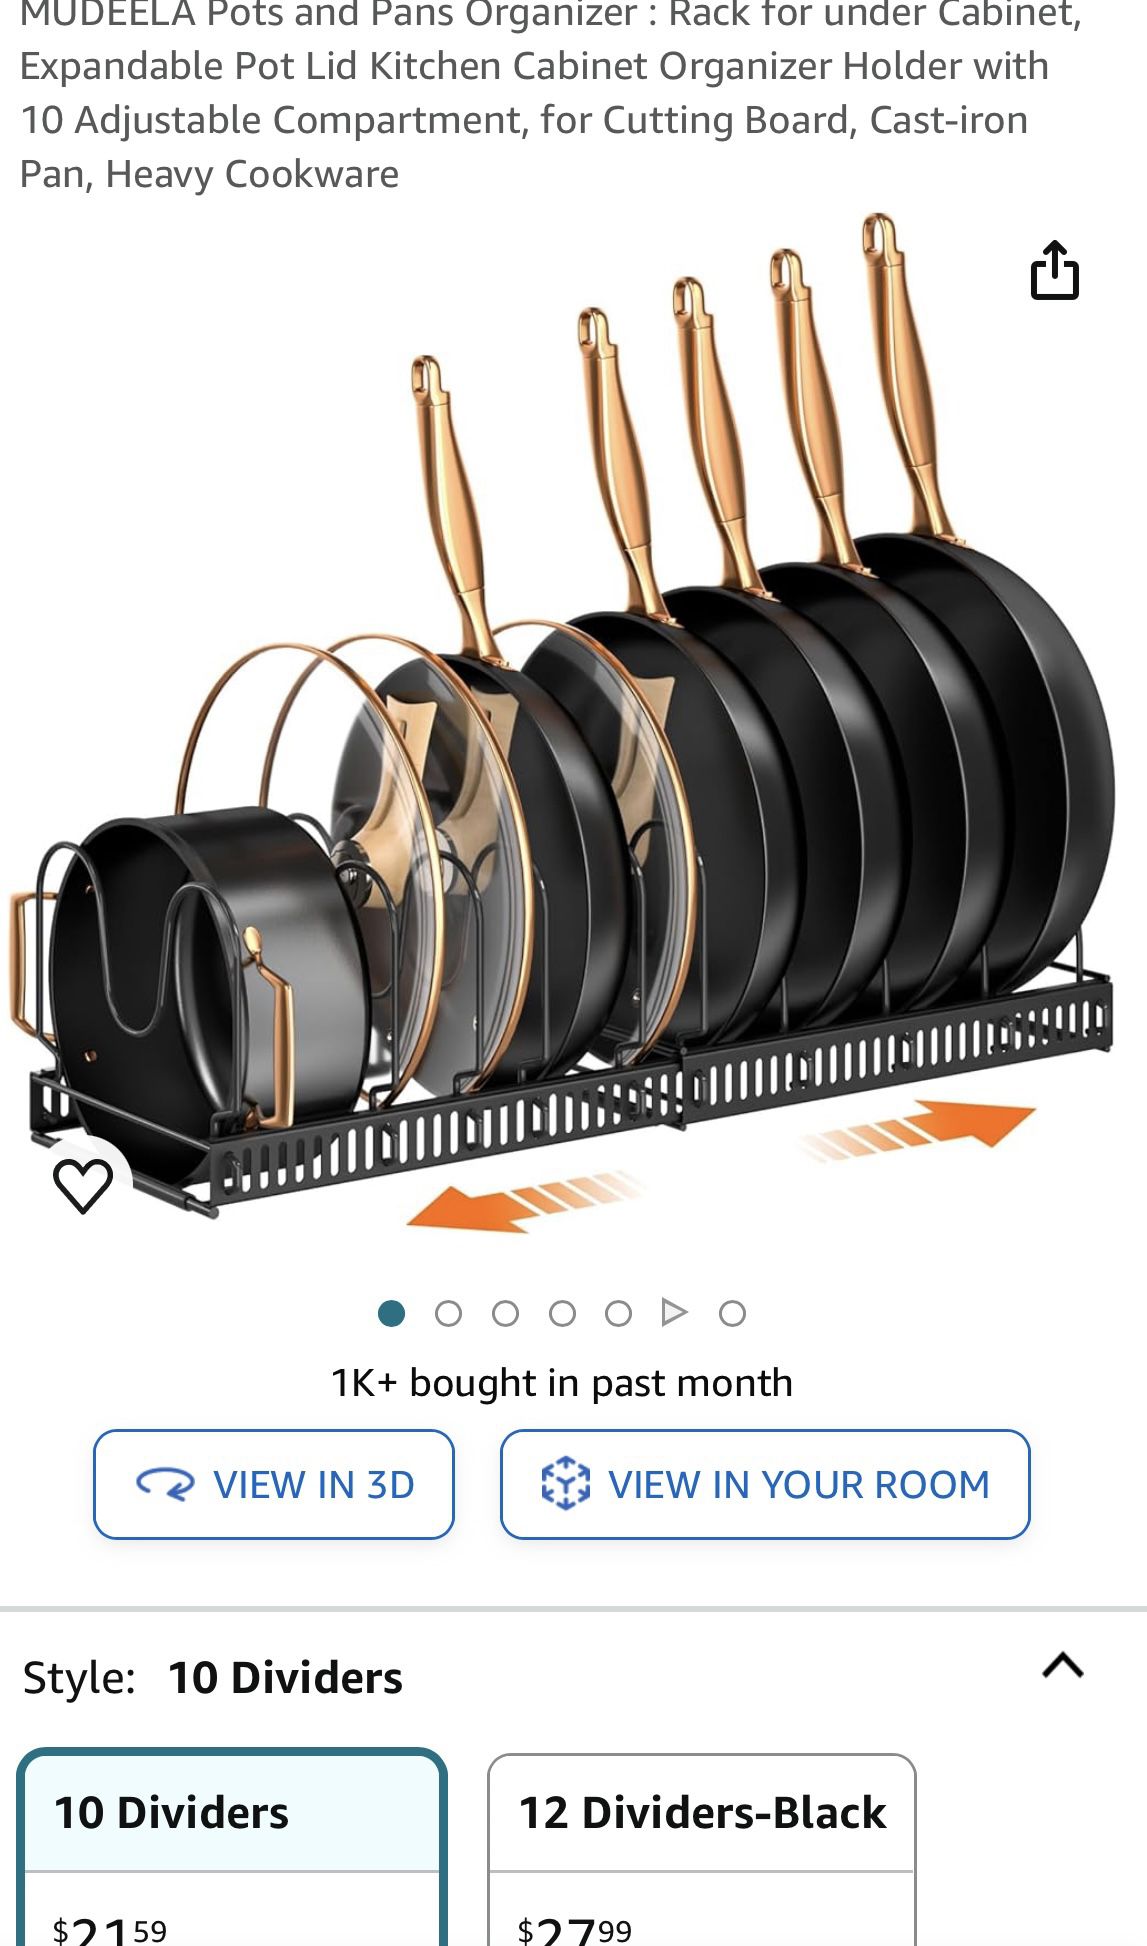 Pots and Pans Organizer : Rack for under Cabinet, Expandable Pot Lid Kitchen Cabinet Organizer Holder with 10 Adjustable Compartment, 